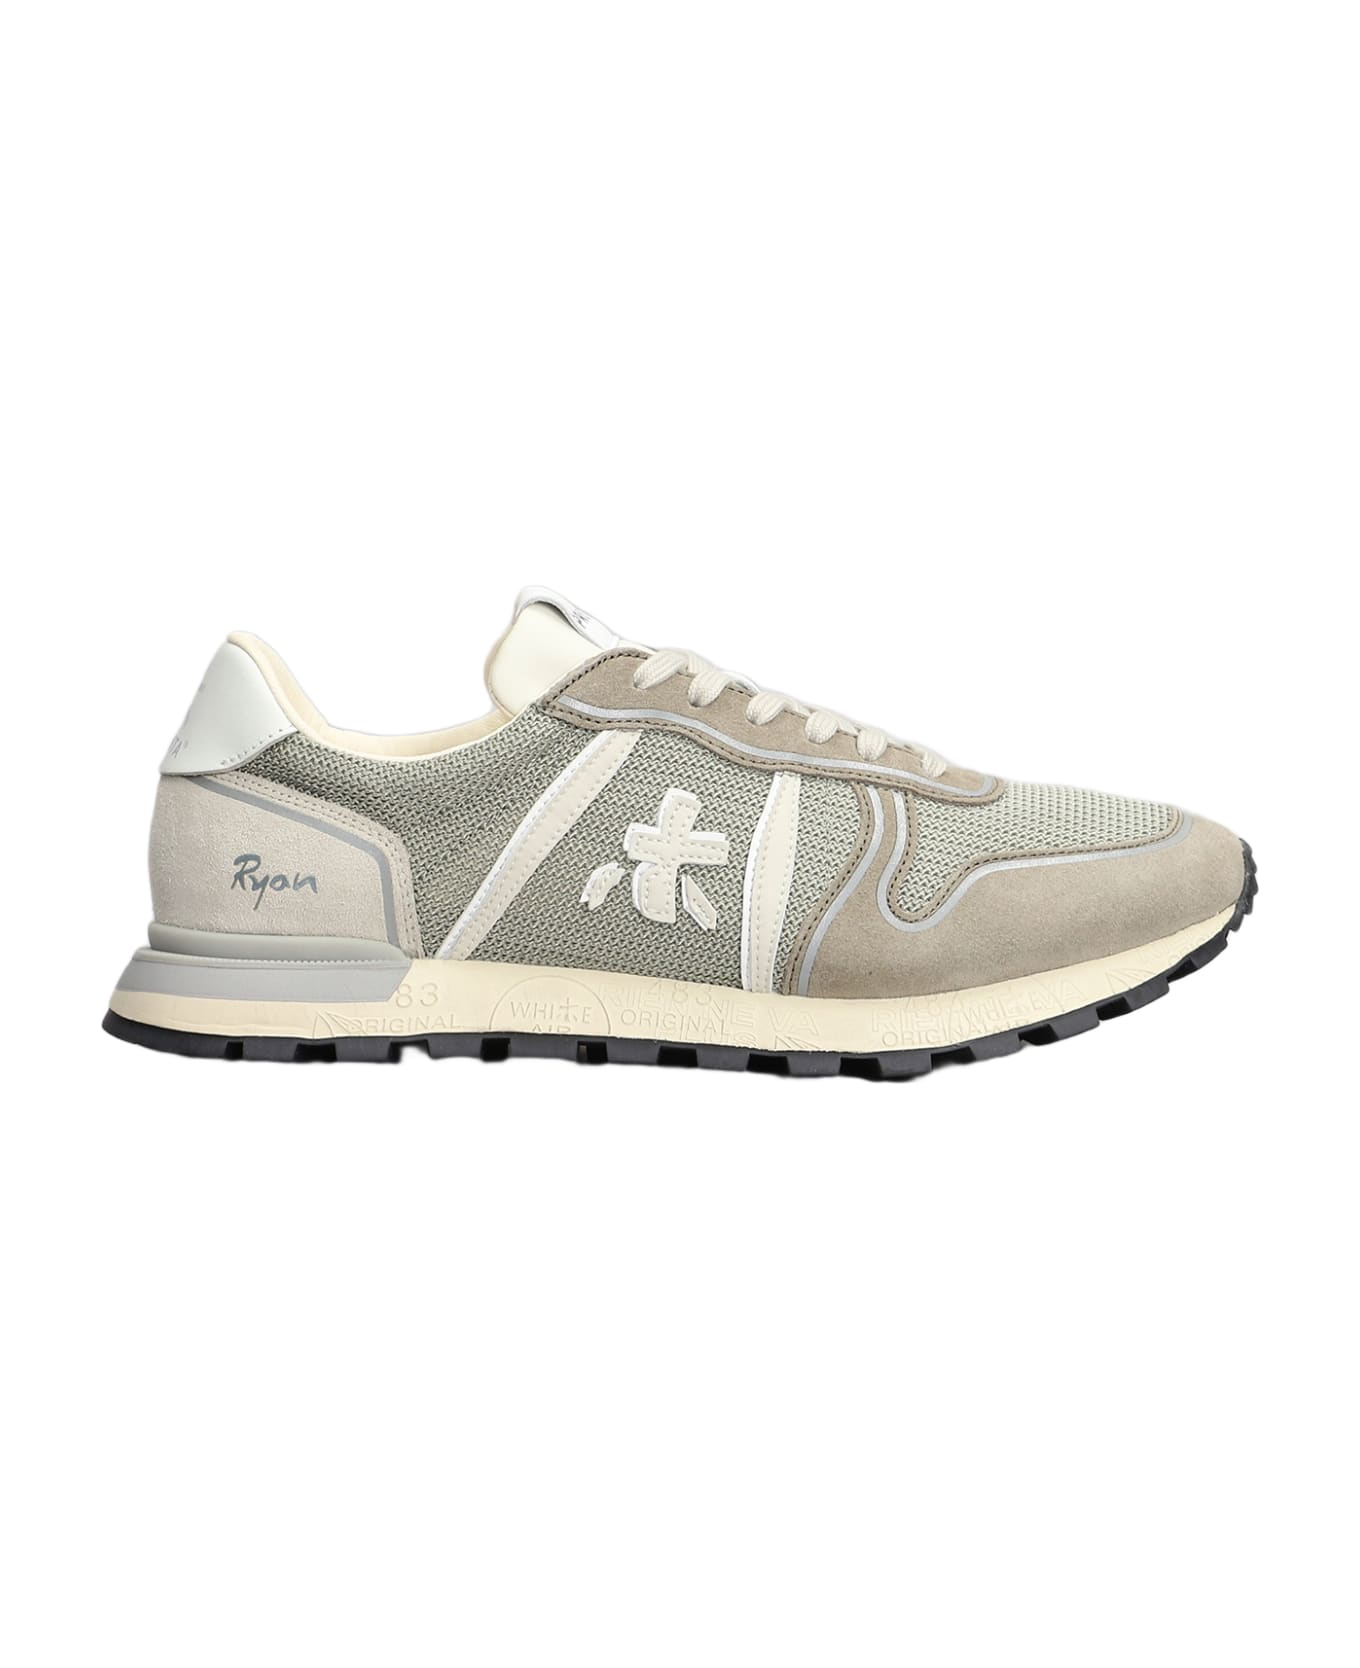 Premiata Ryan Sneakers In Taupe Suede And Fabric - Beige